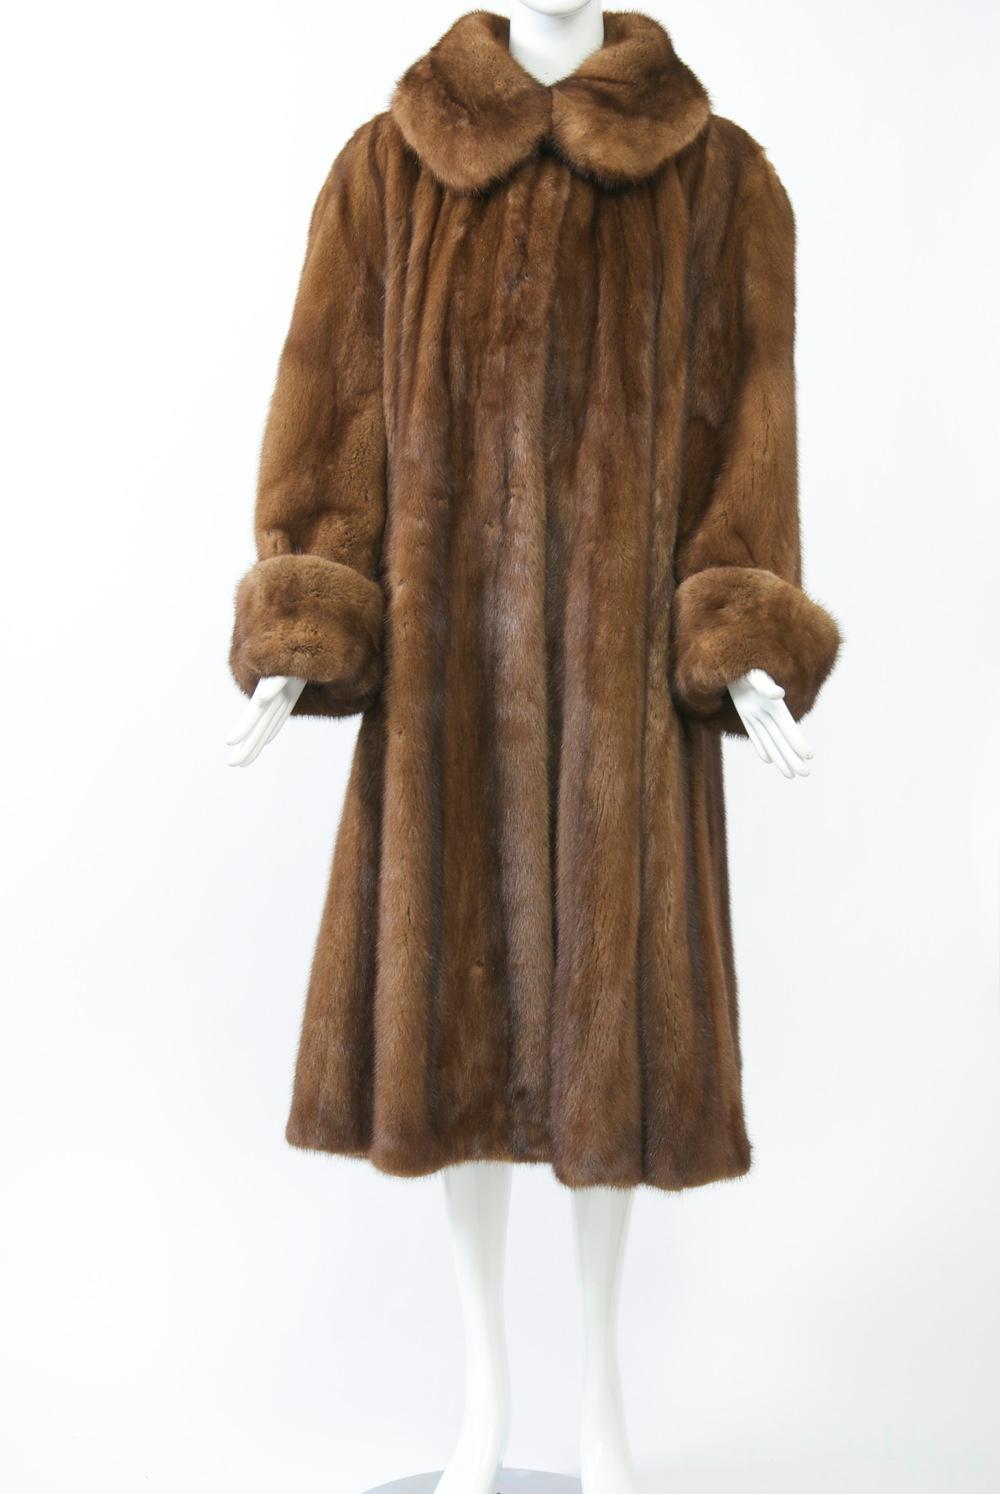 Wrap yourself in luxury and warmth with this golden mink swing coat. Ample vertical skins boast a round collar, dolman sleeves and deep, turned back cuffs. Hidden slash pockets. Decorative button at neck, two fur hook closures in front. A glamorous